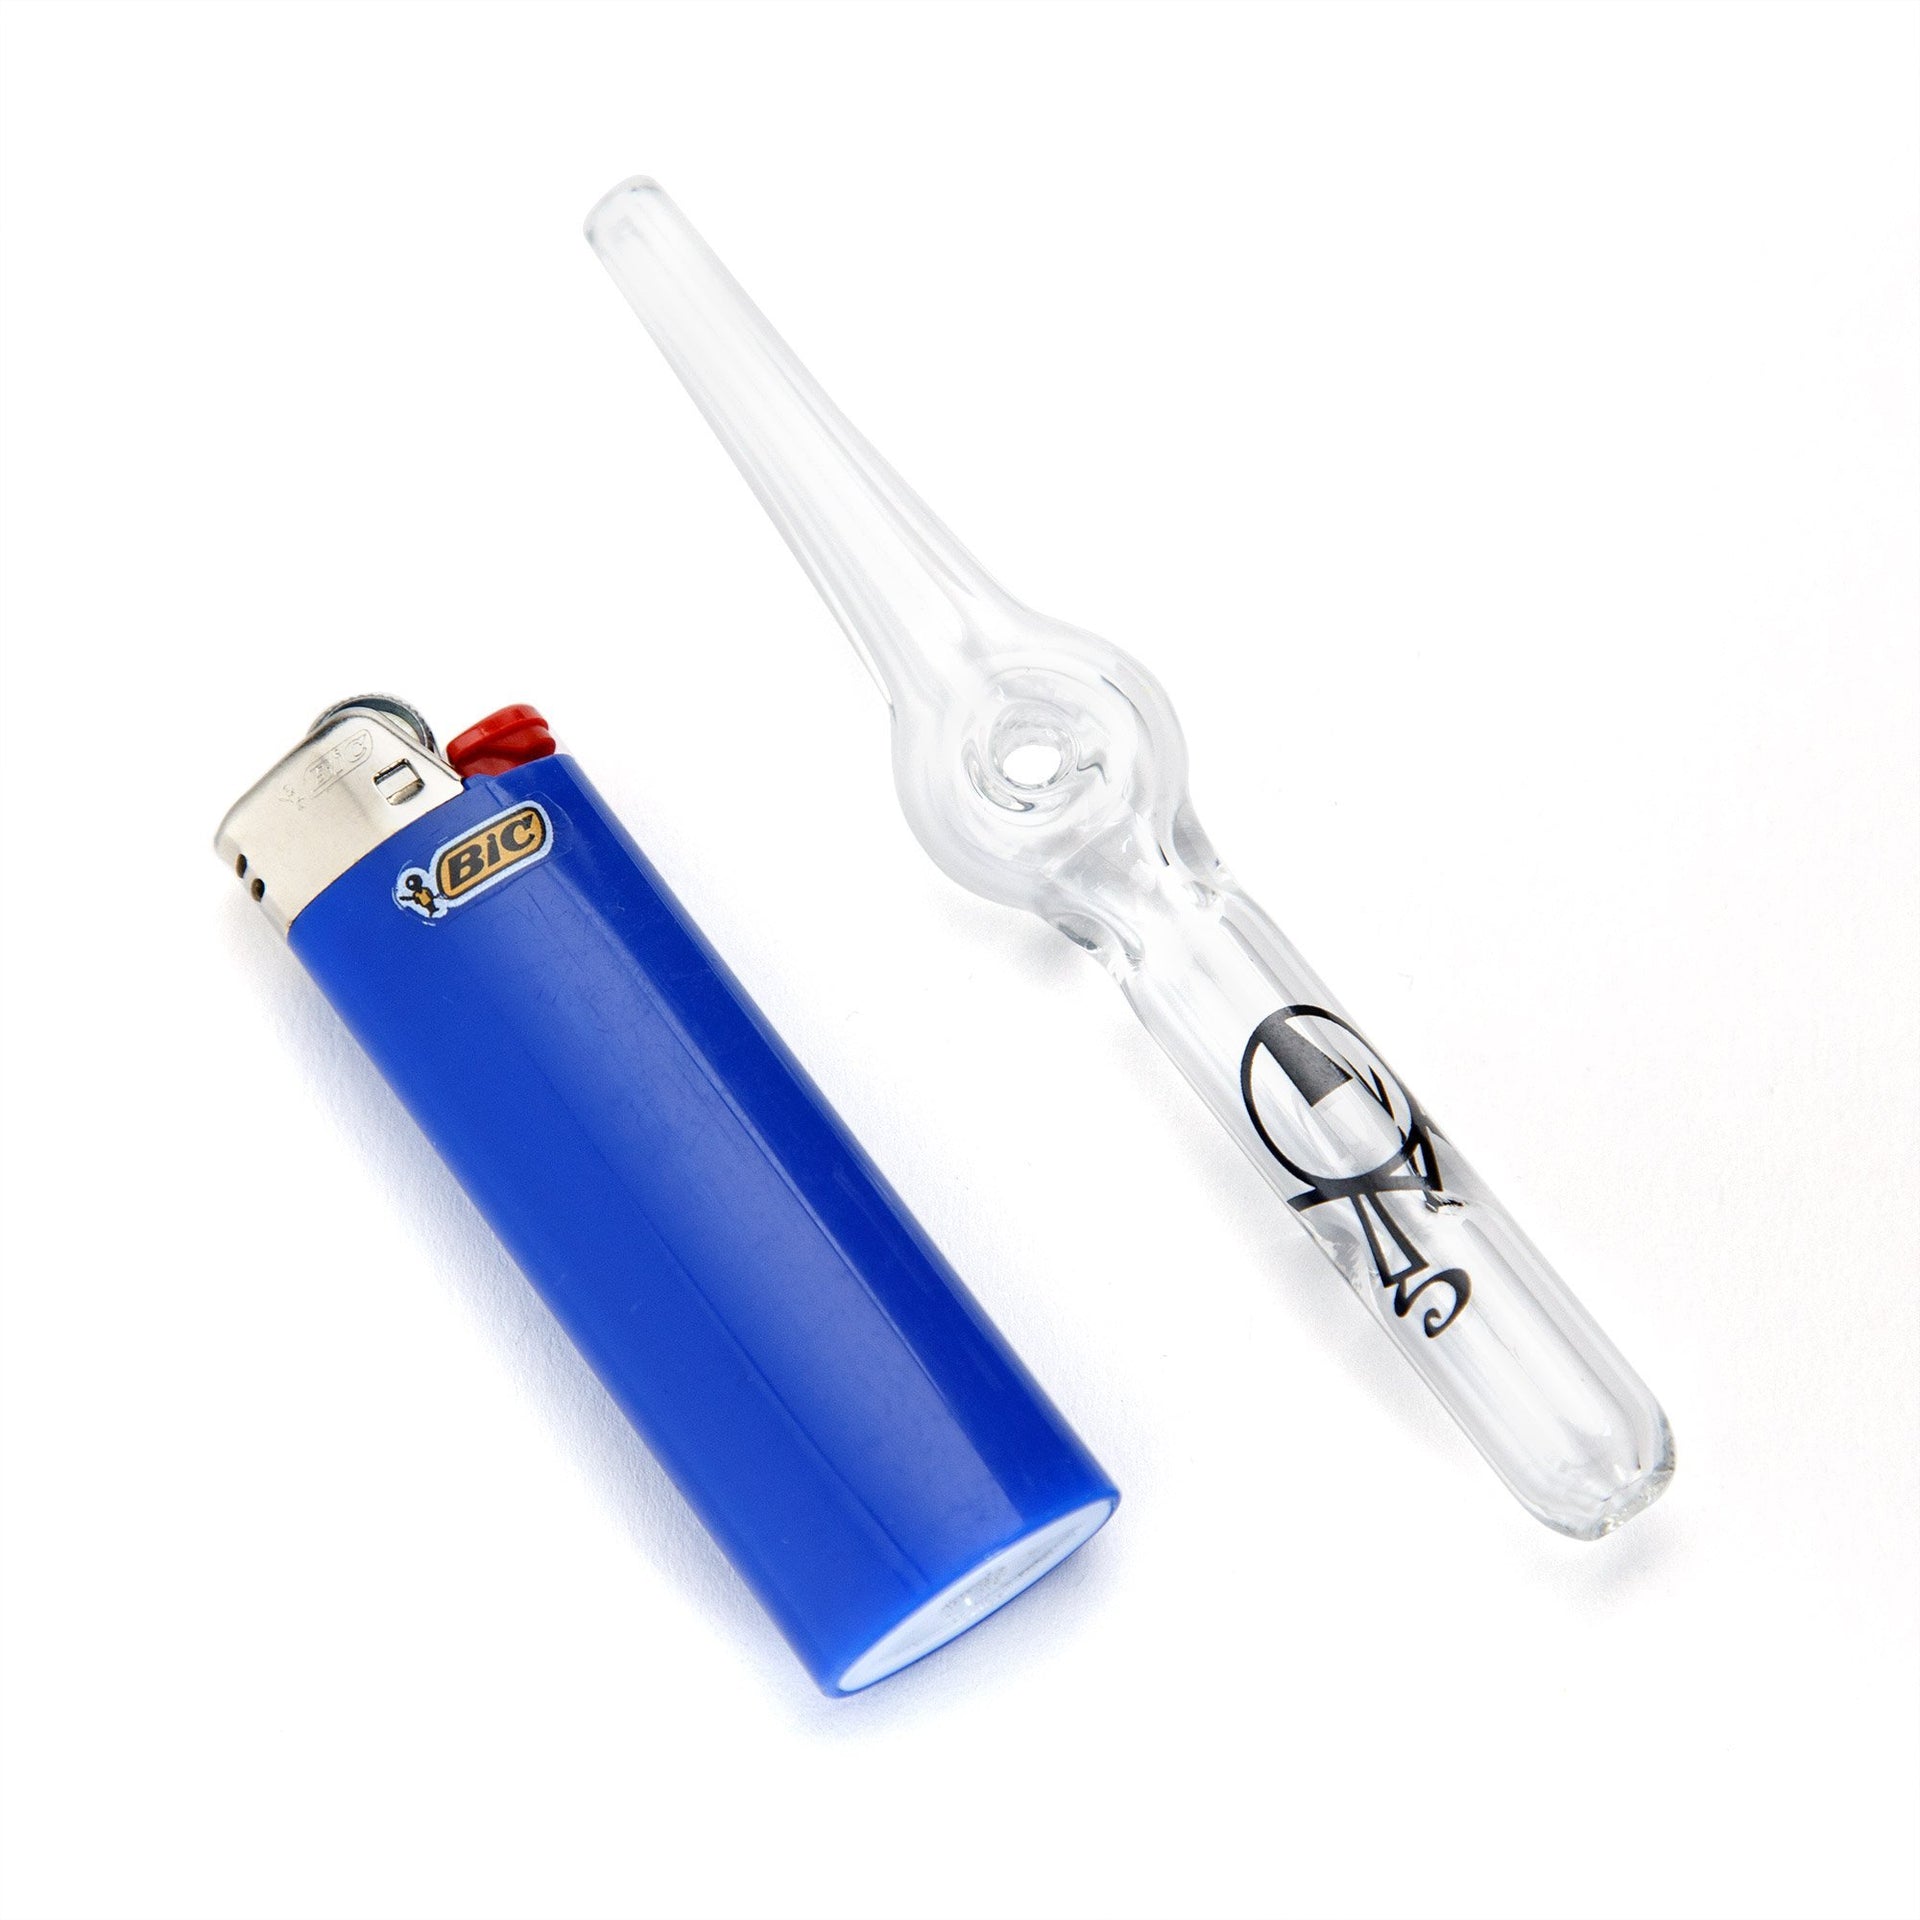 Home Blown Glass Road Straw Air-Cooled Dry Rig - 420 Science - The most trusted online smoke shop.